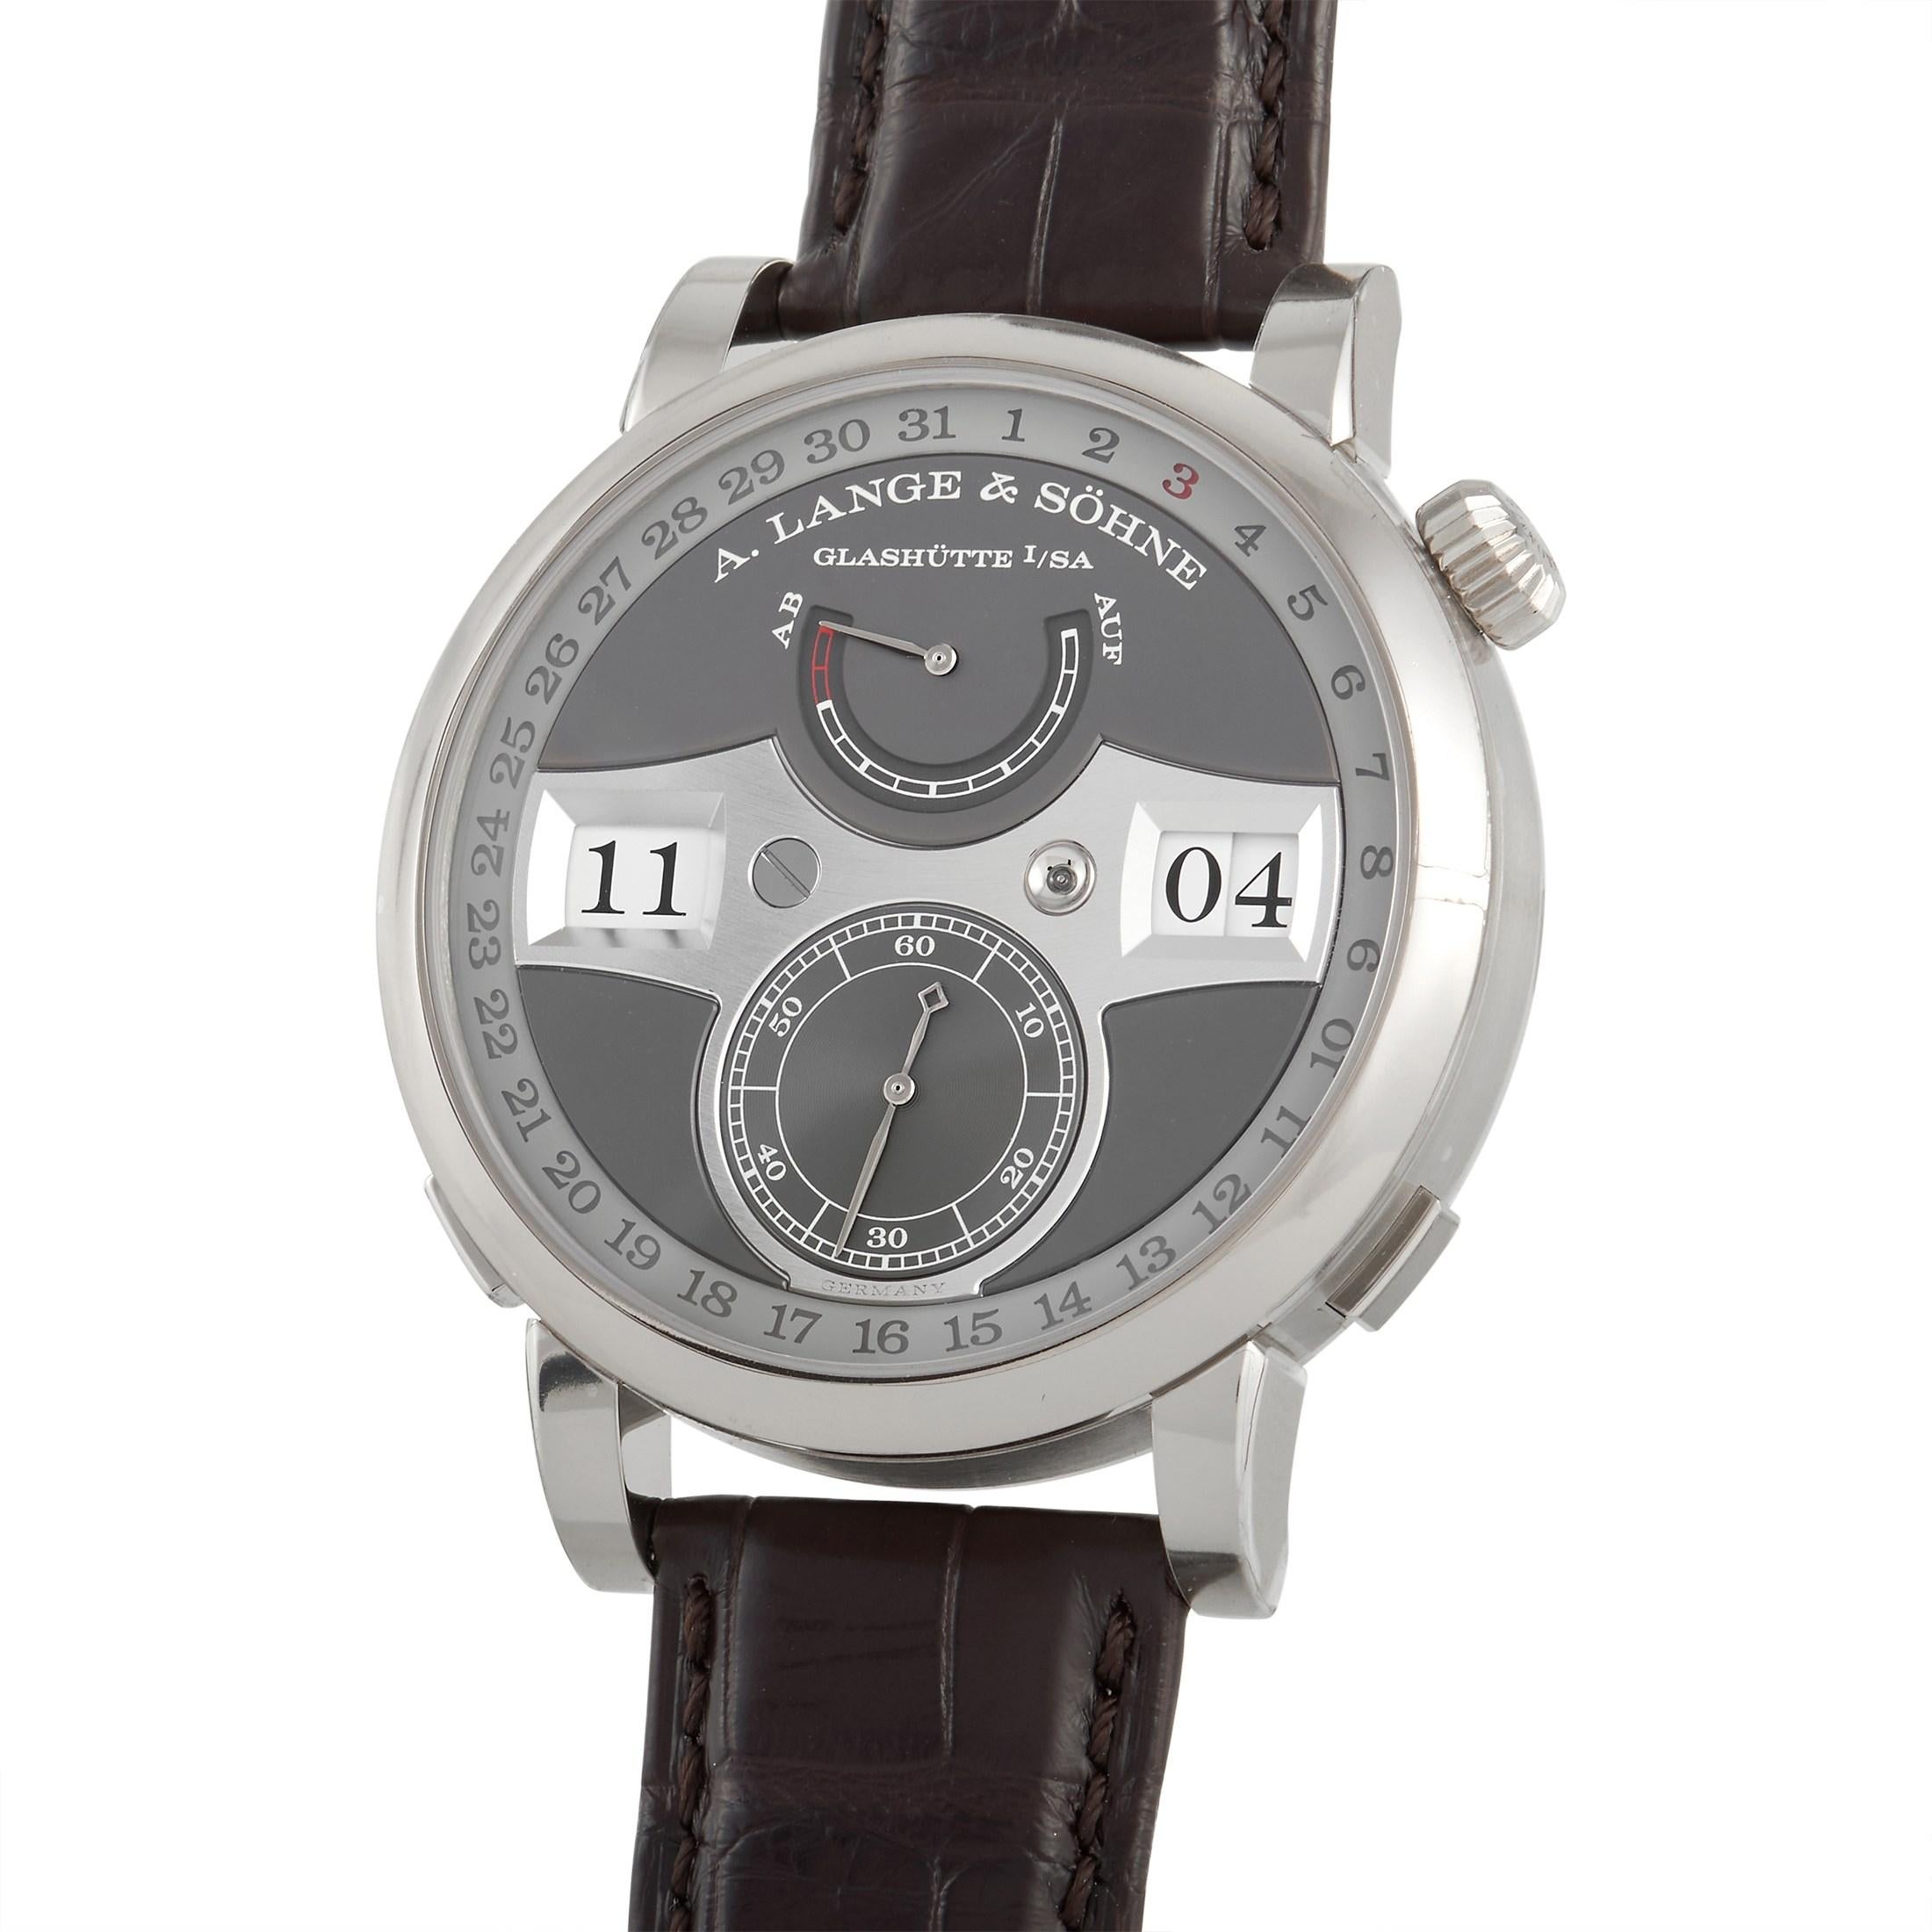 The A Lange & Sohne Zeitwerk Date Watch, reference number 148.038, provides a fresh, contemporary take on a classic timepiece. 

Attached to a brown leather strap, you’ll find a 44mm case crafted from 18K White Gold. On the light gray dial, you’ll